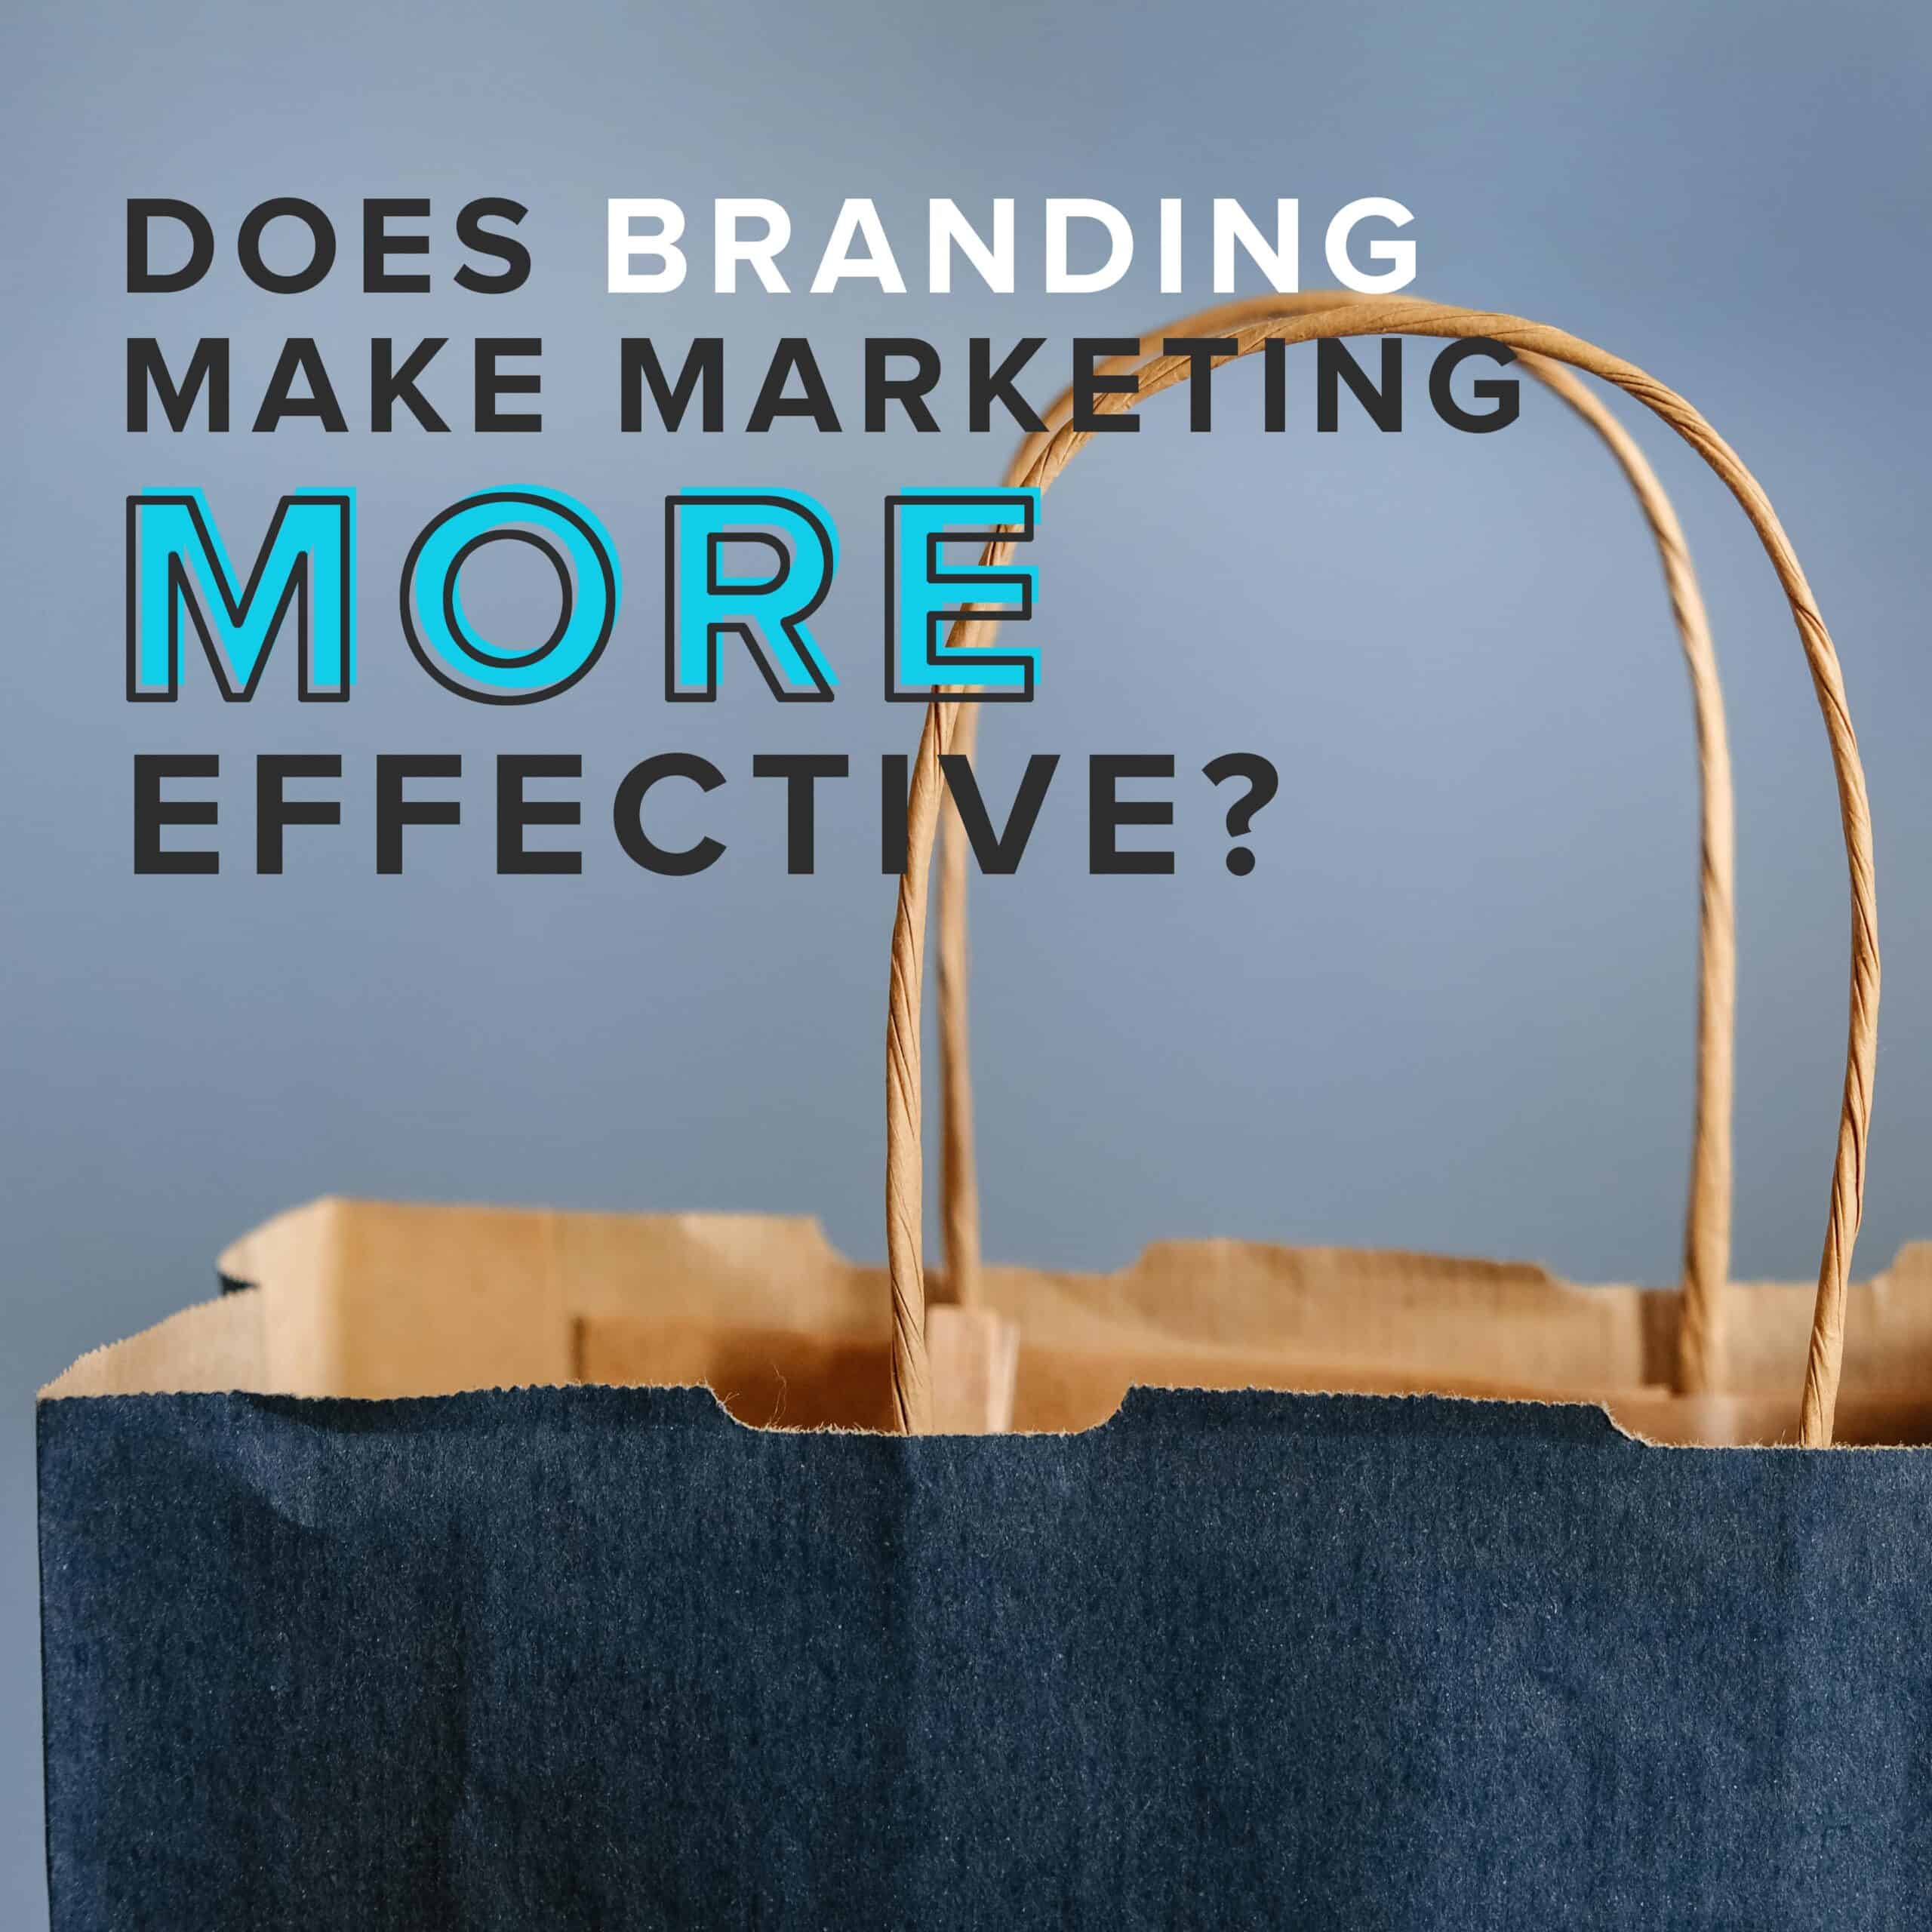 The REX Agency | How Does Branding Make Marketing More Effective? - Branding Makes Marketing More Effective